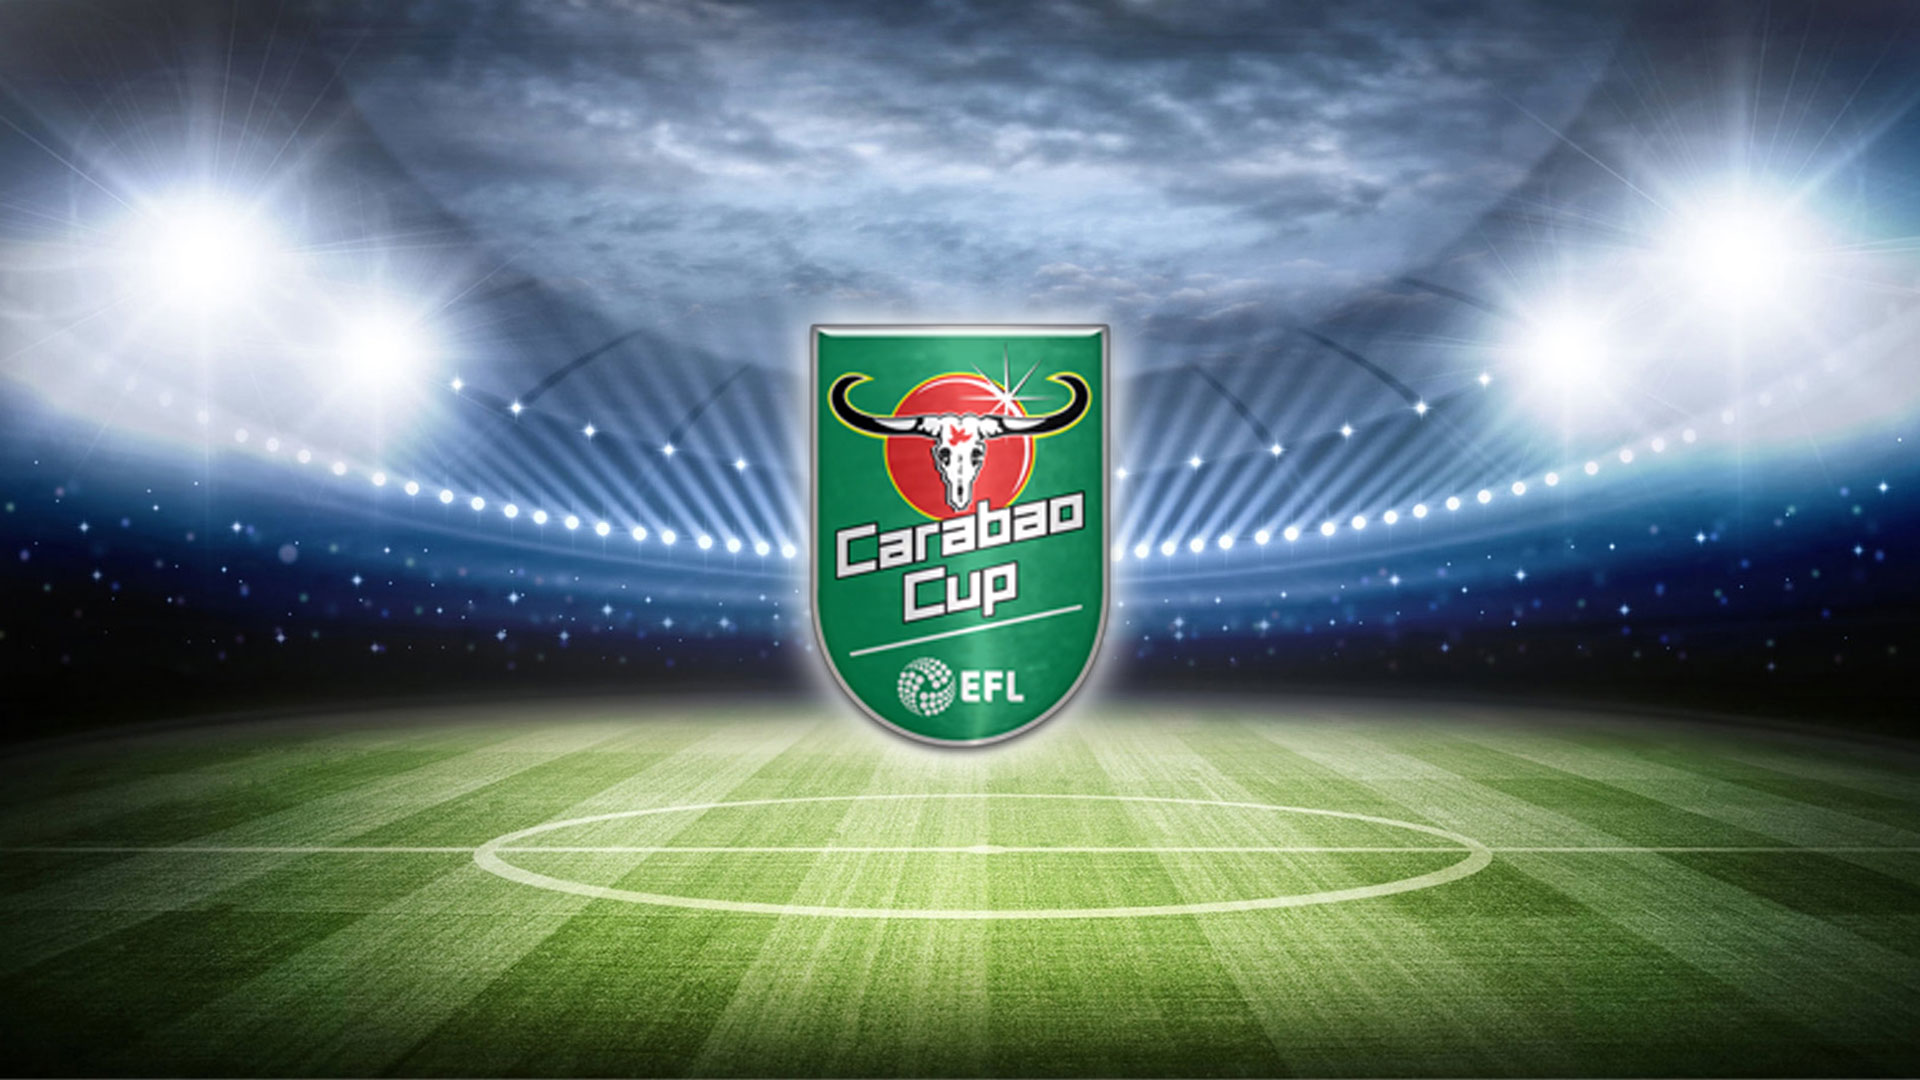 Carabao Cup Background Megapack